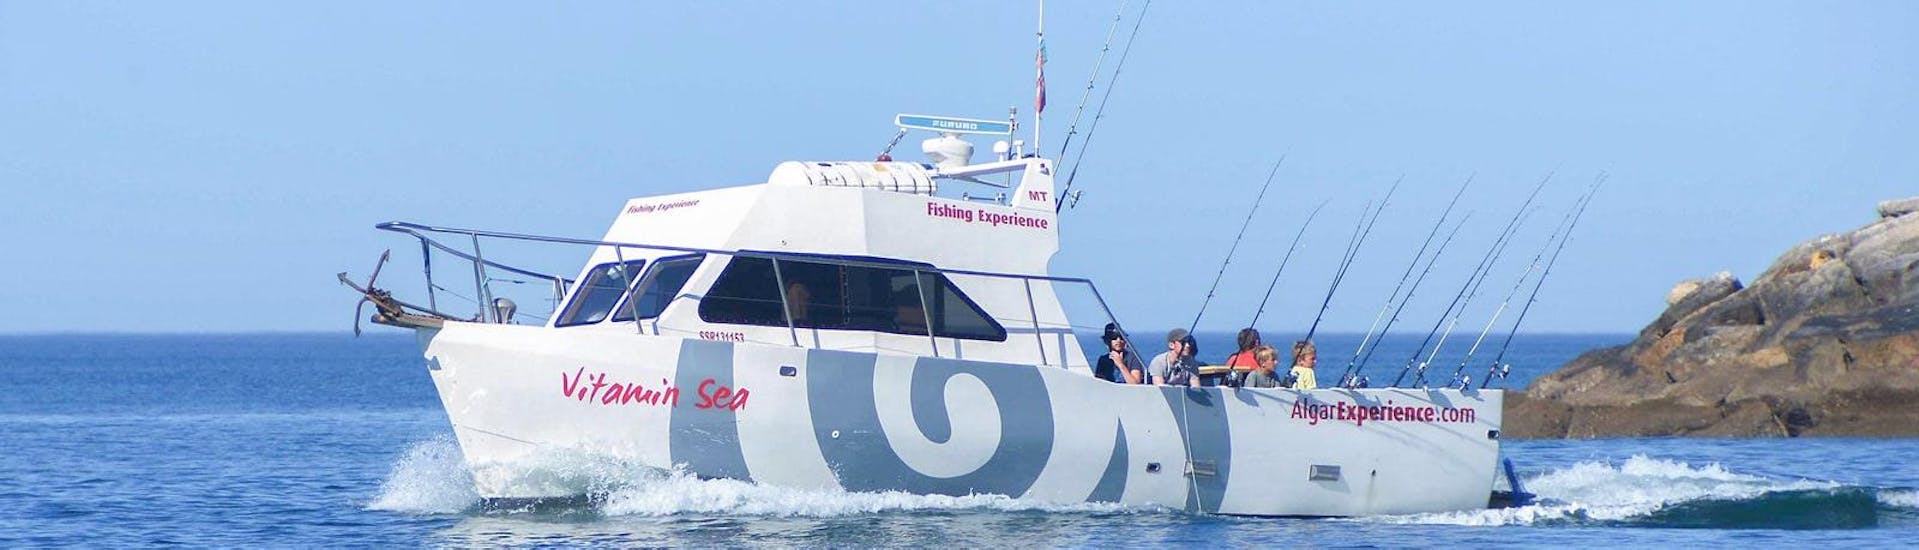 Half-Day Boat Tour from Albufeira with Reef Fishing with AlgarExperience - Hero image